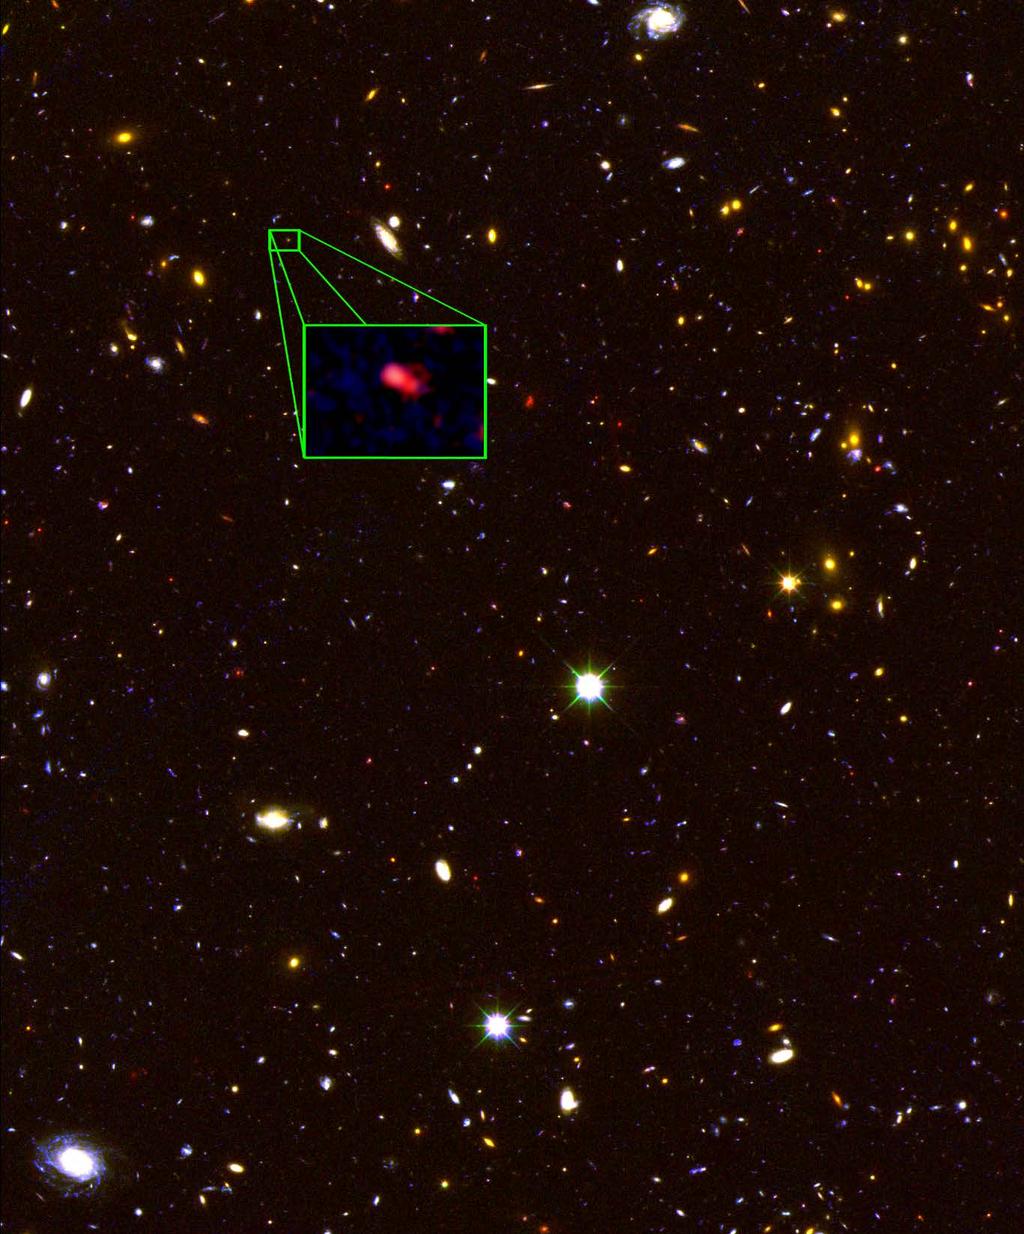 Galaxy with largest distance determined from its redshift.